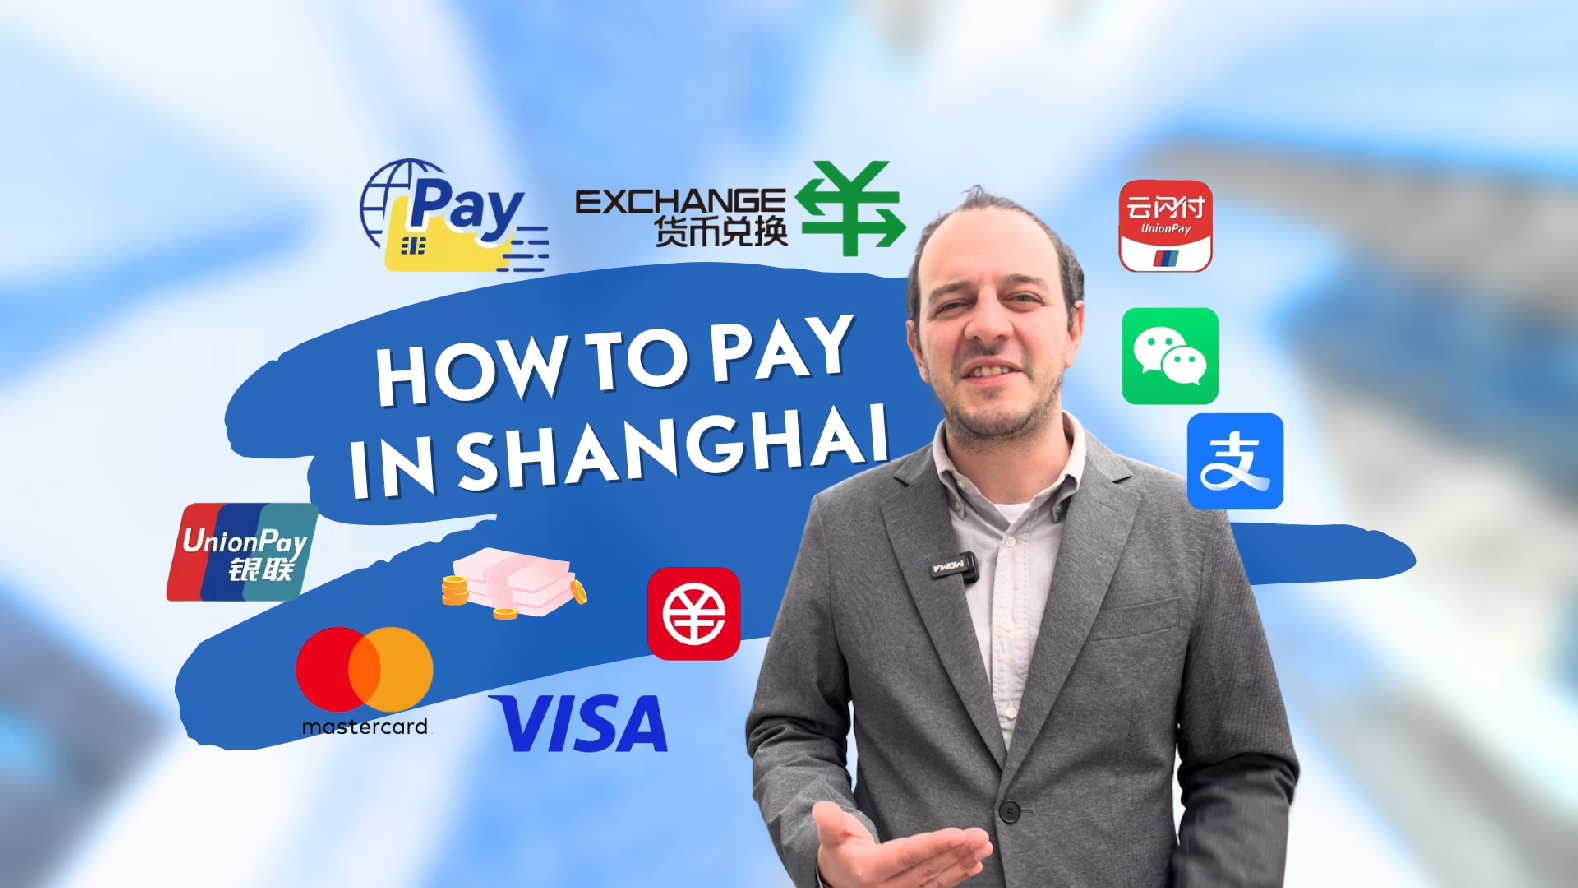 Video series: How to Pay in Shanghai